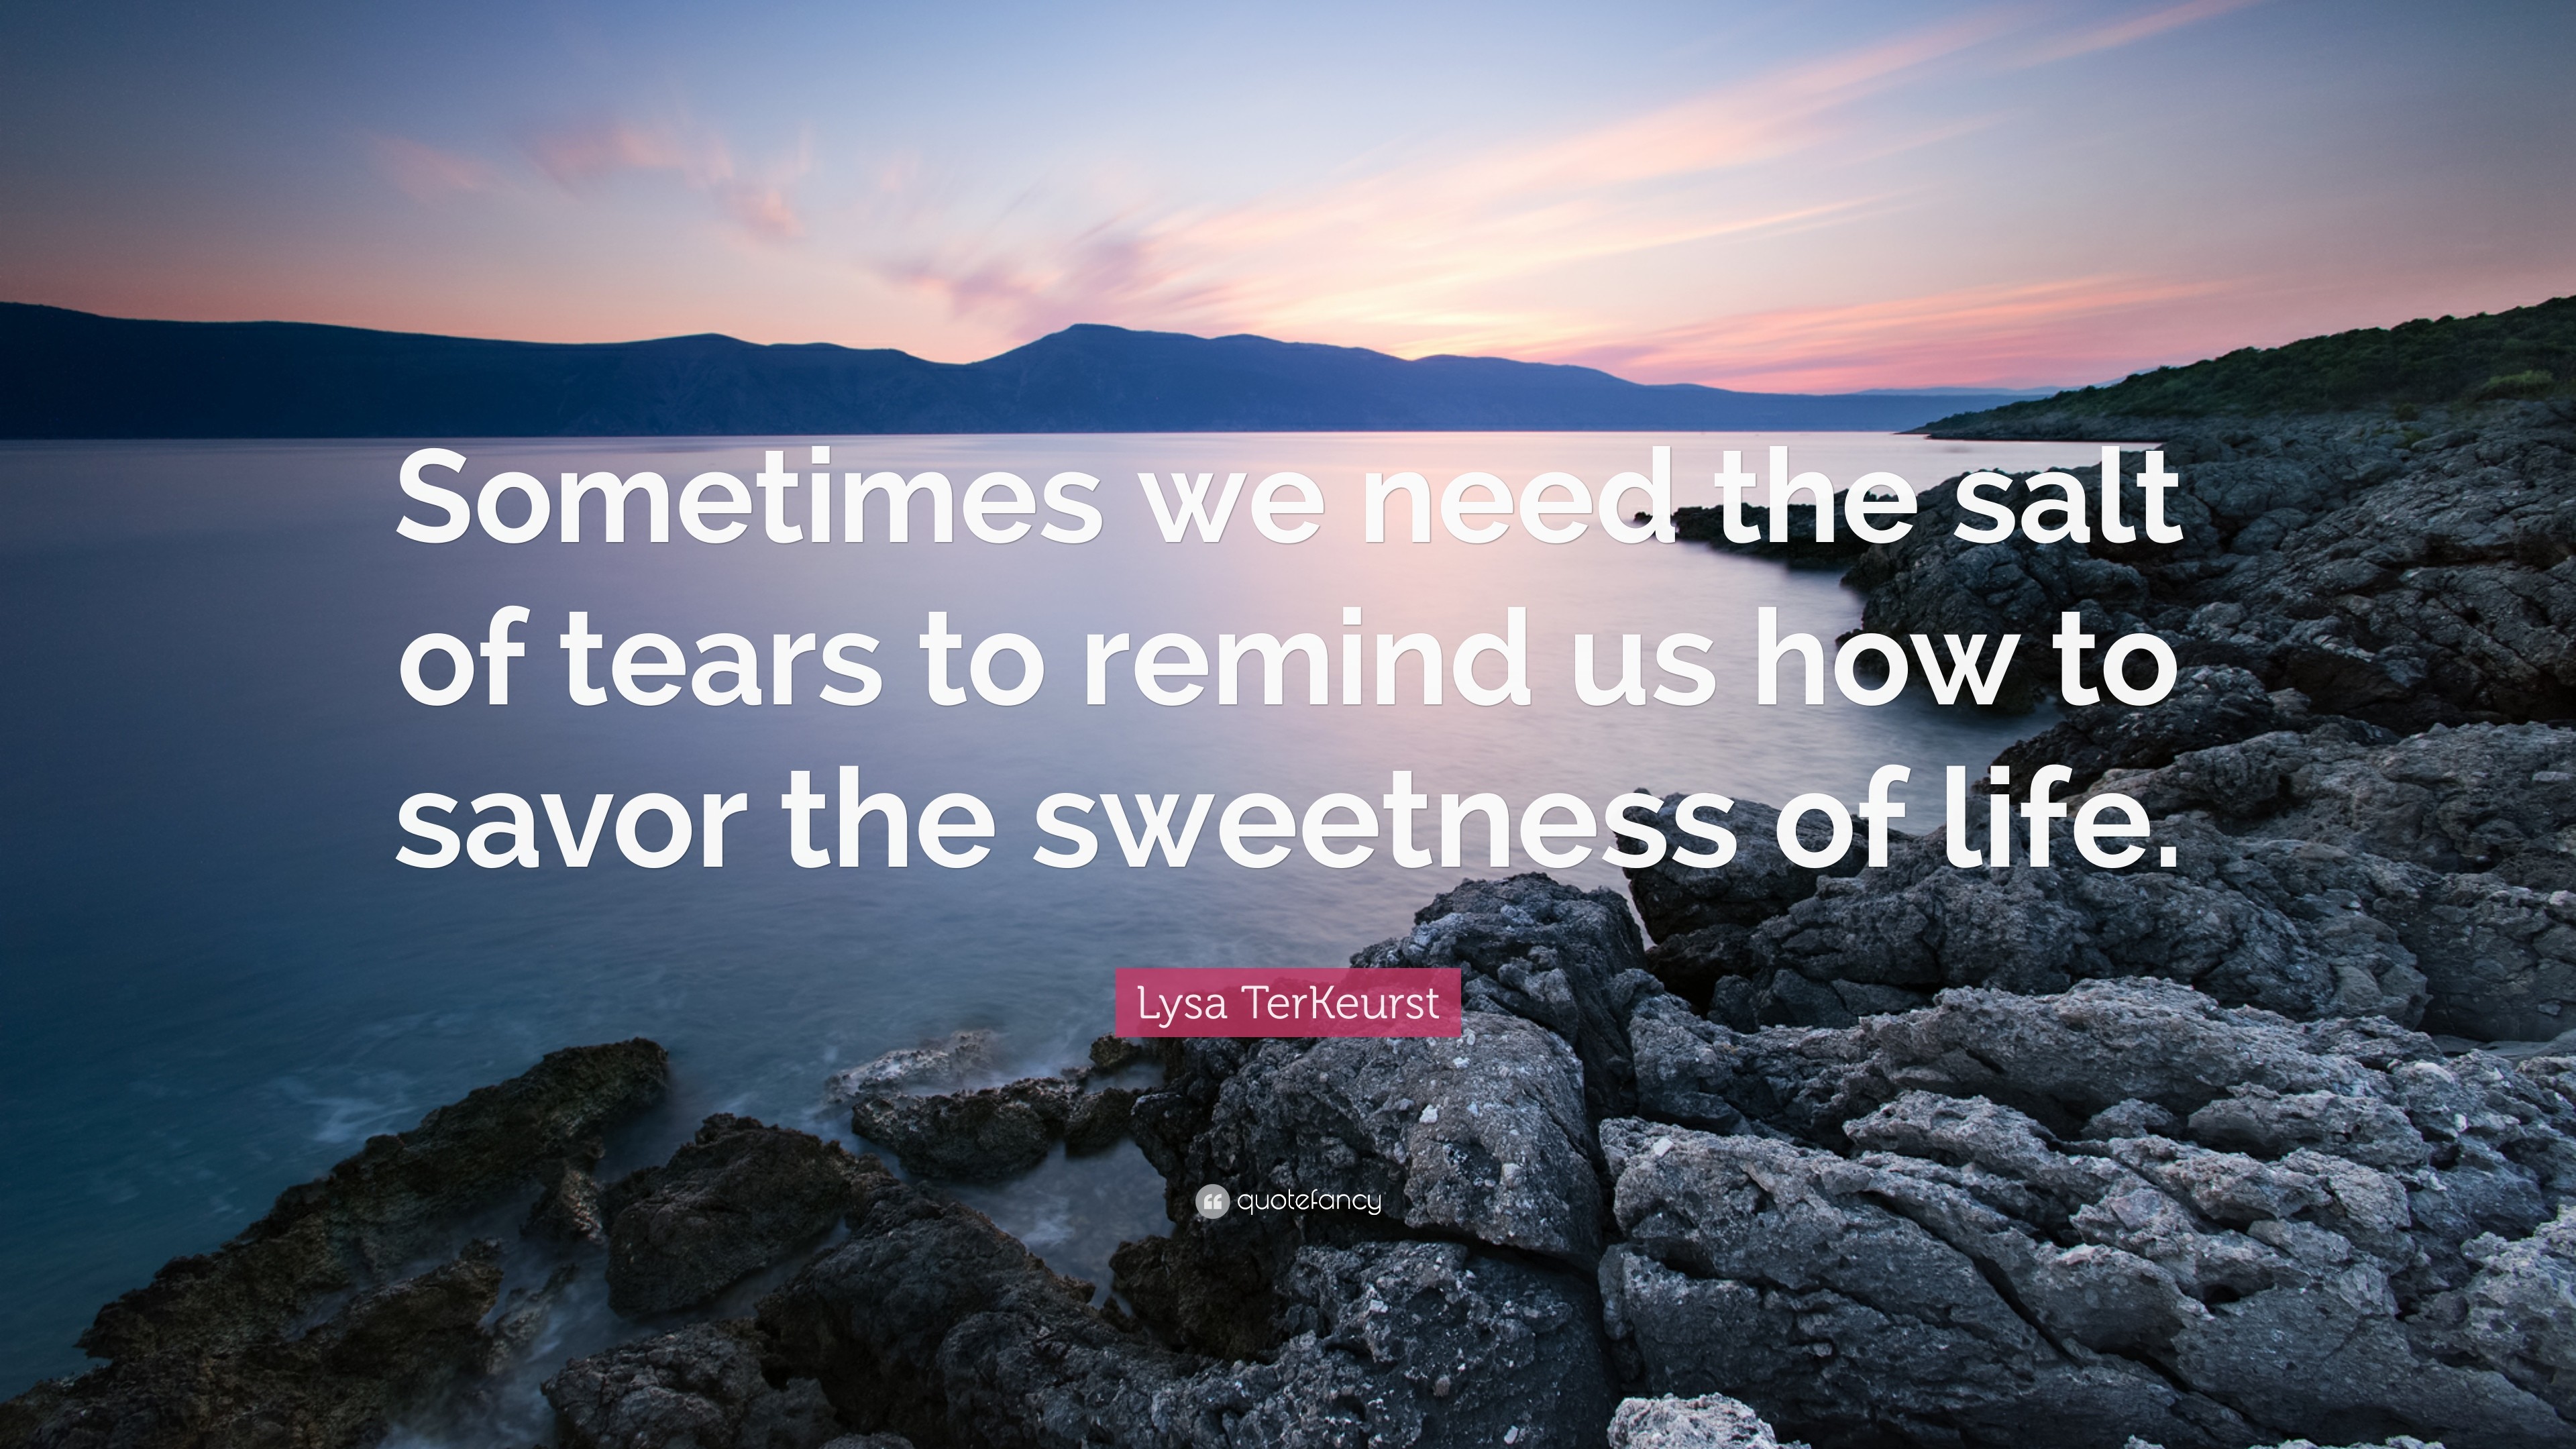 3840x2160 Lysa TerKeurst Quote: “Sometimes we need the salt of tears to remind us how